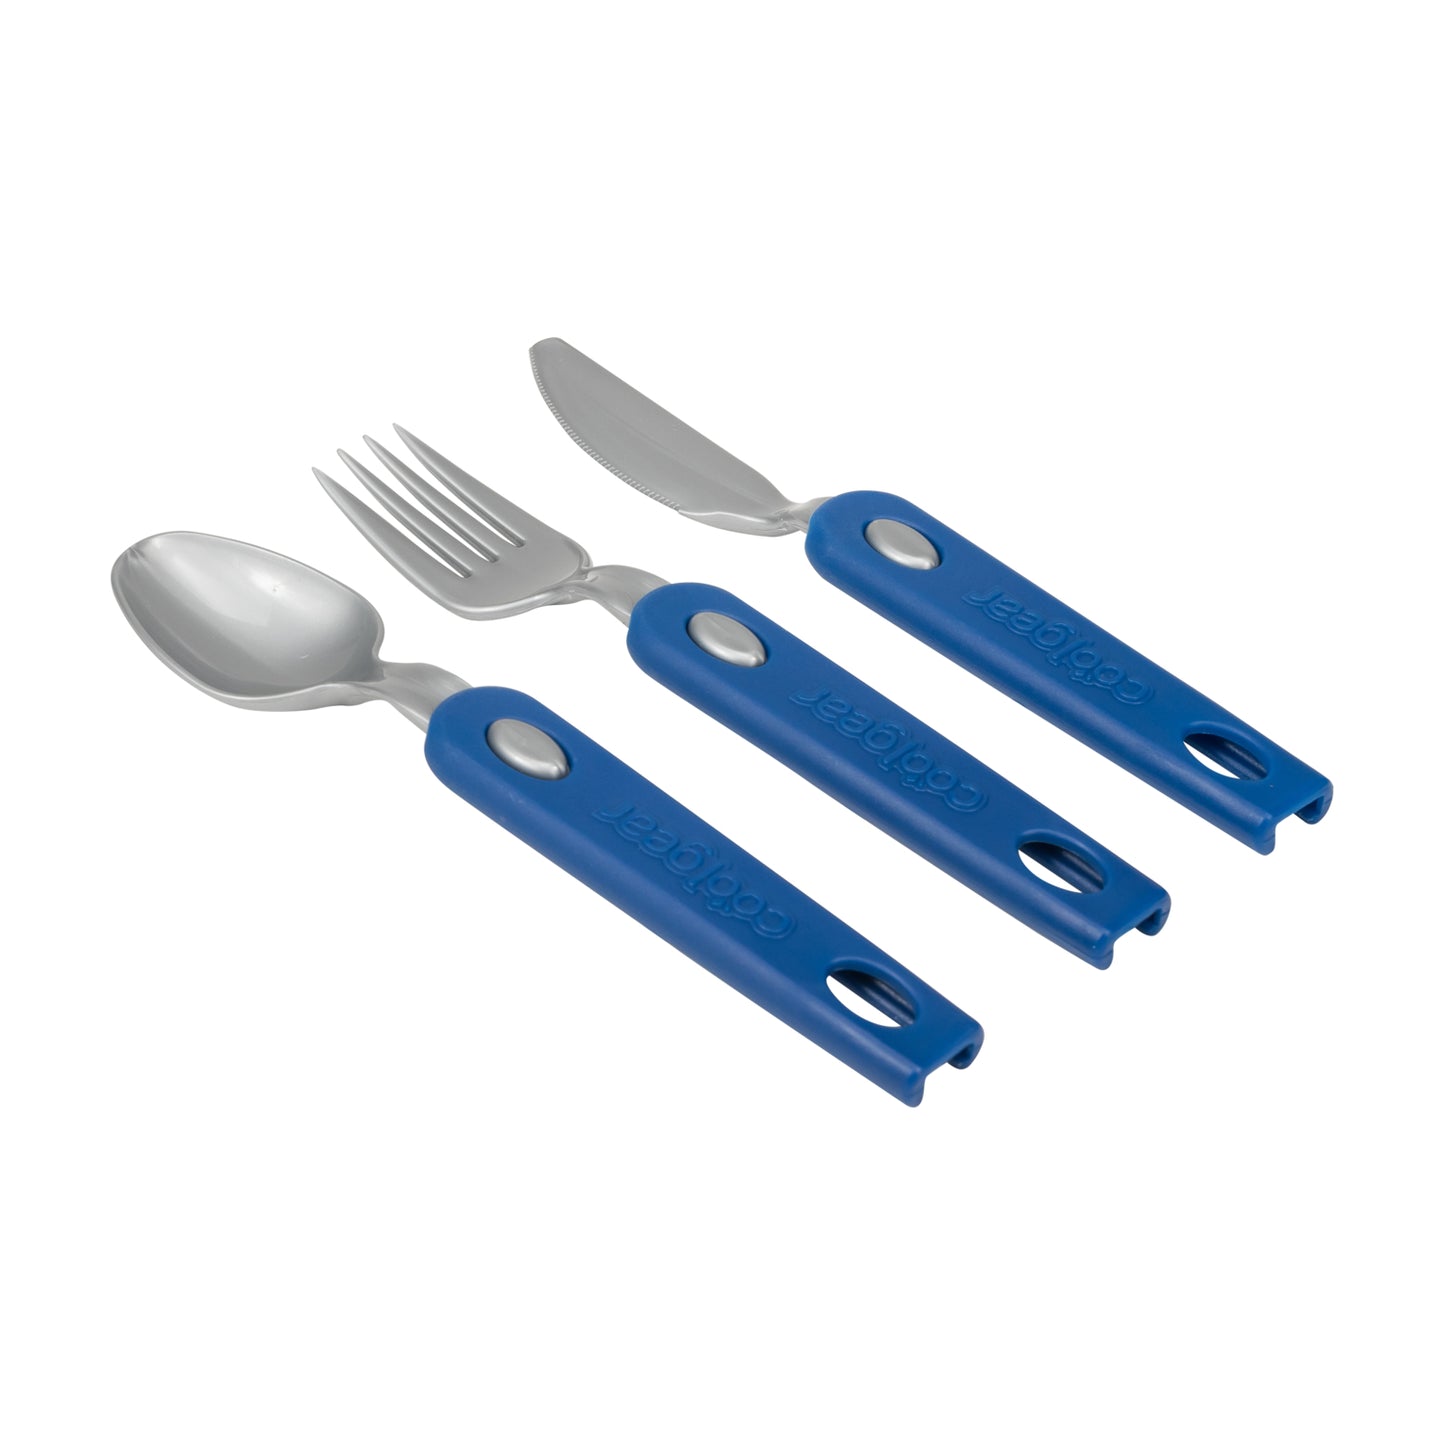 3 in 1 Plastic Reusable Cutlery, Utensils Set With Case, Camping or Travel  Utensil, Eco Friendly. Pink/blue/green/beige 